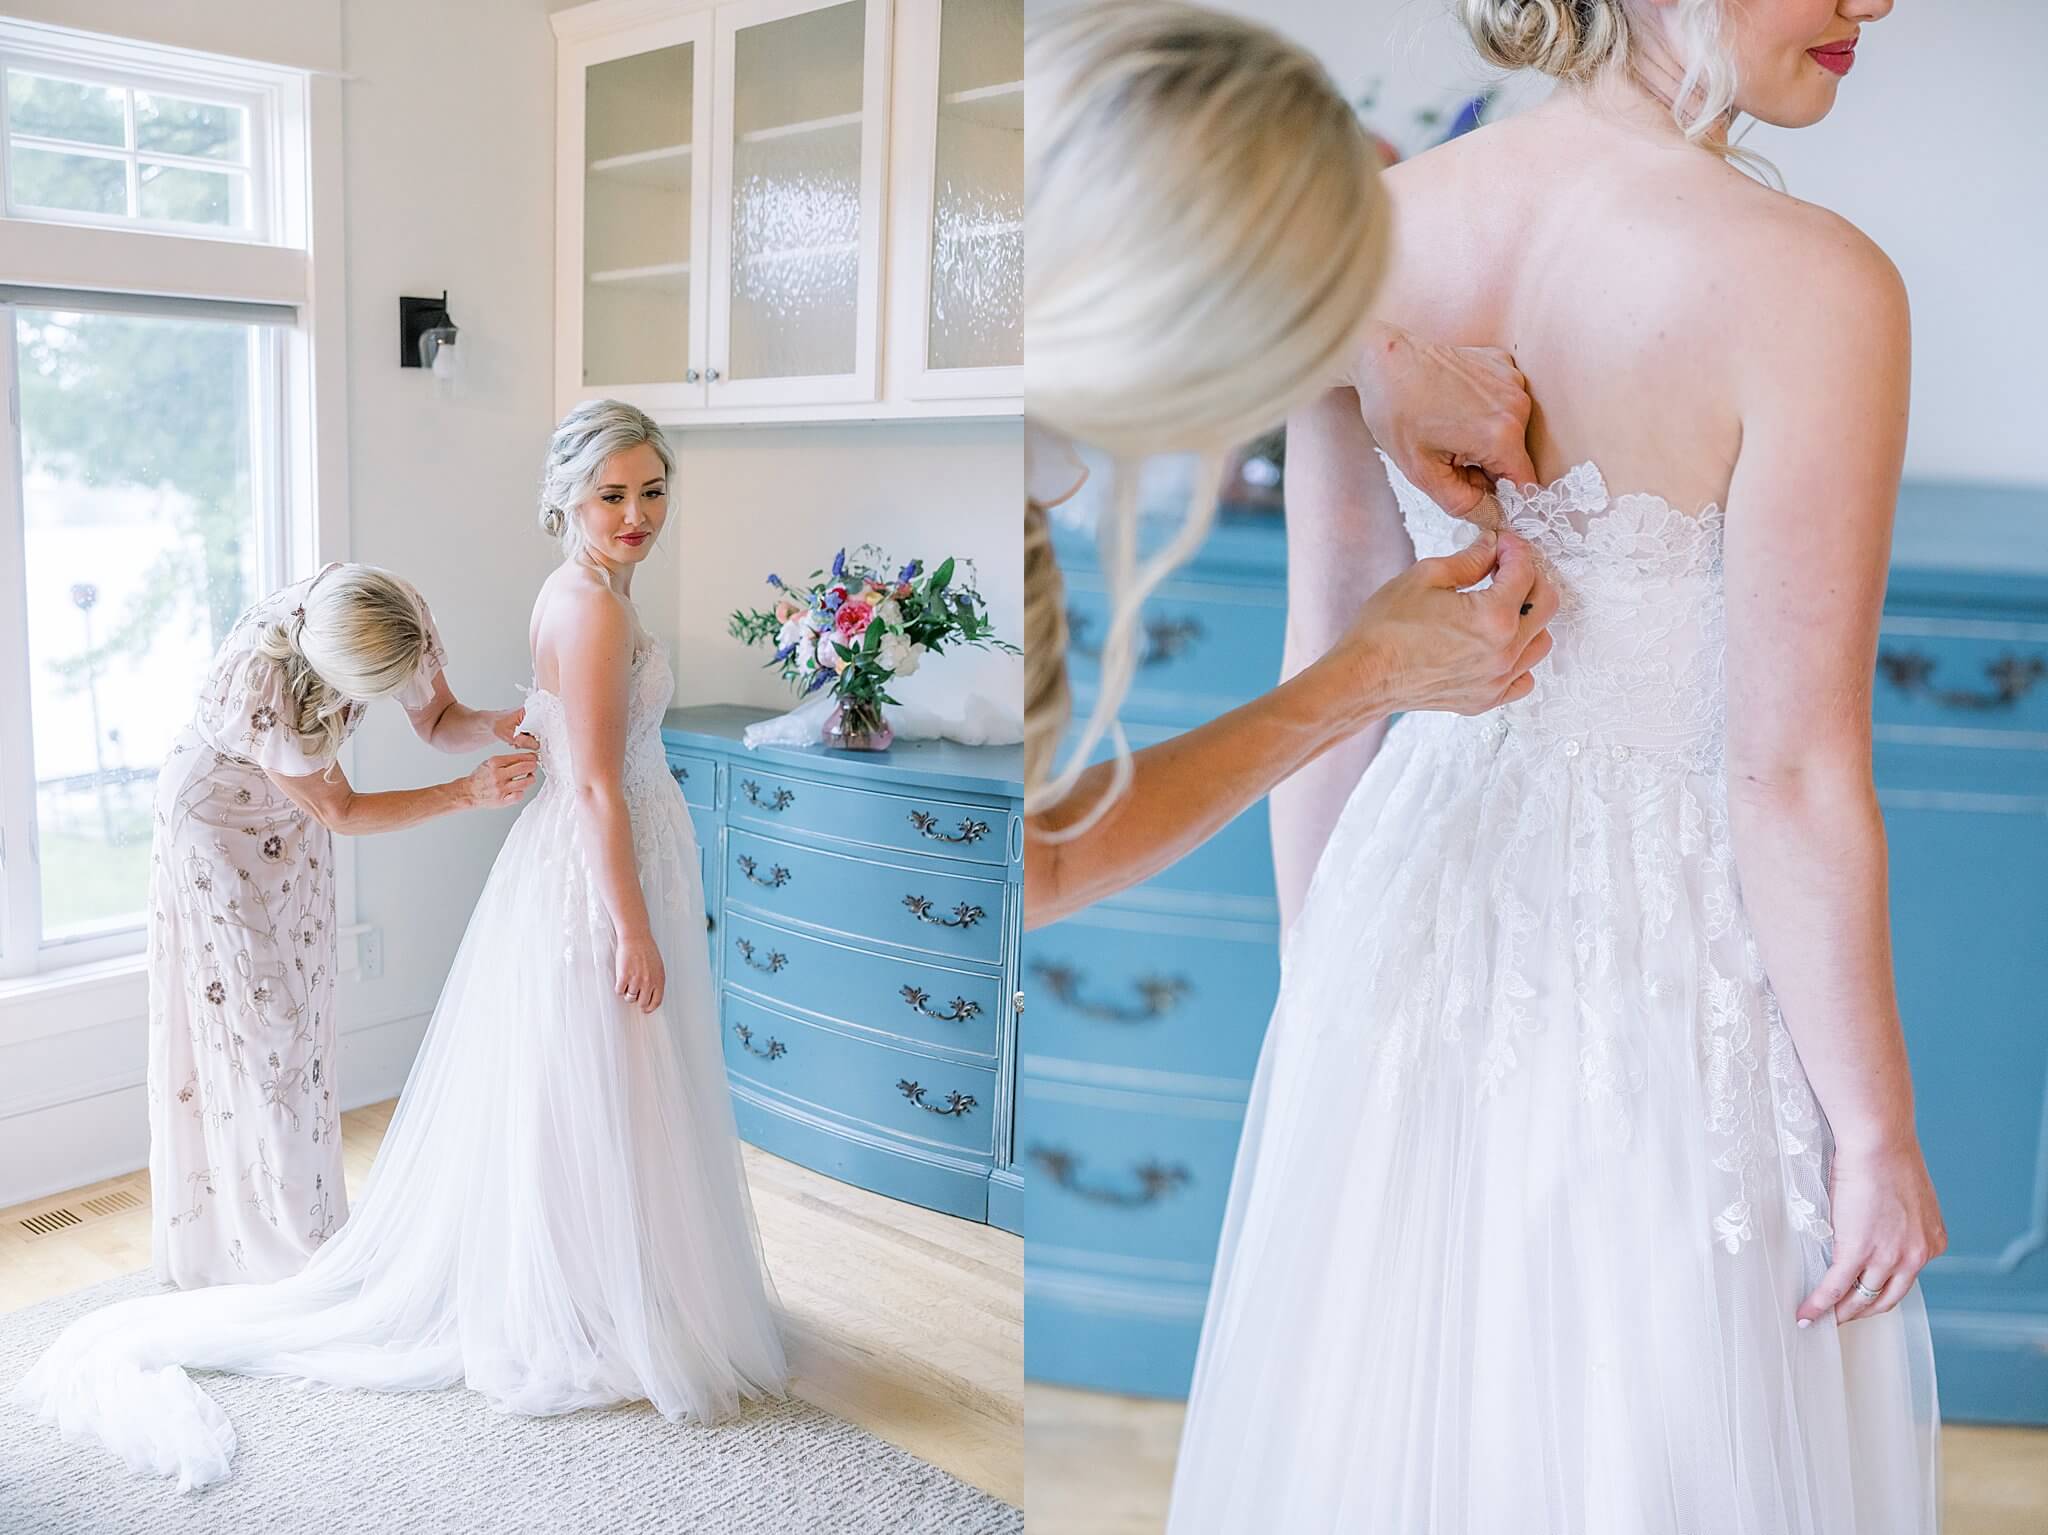 Mother of the bride helps fasten vintage lace dress for her daughter while she gets ready for her Traverse City wedding ceremony.